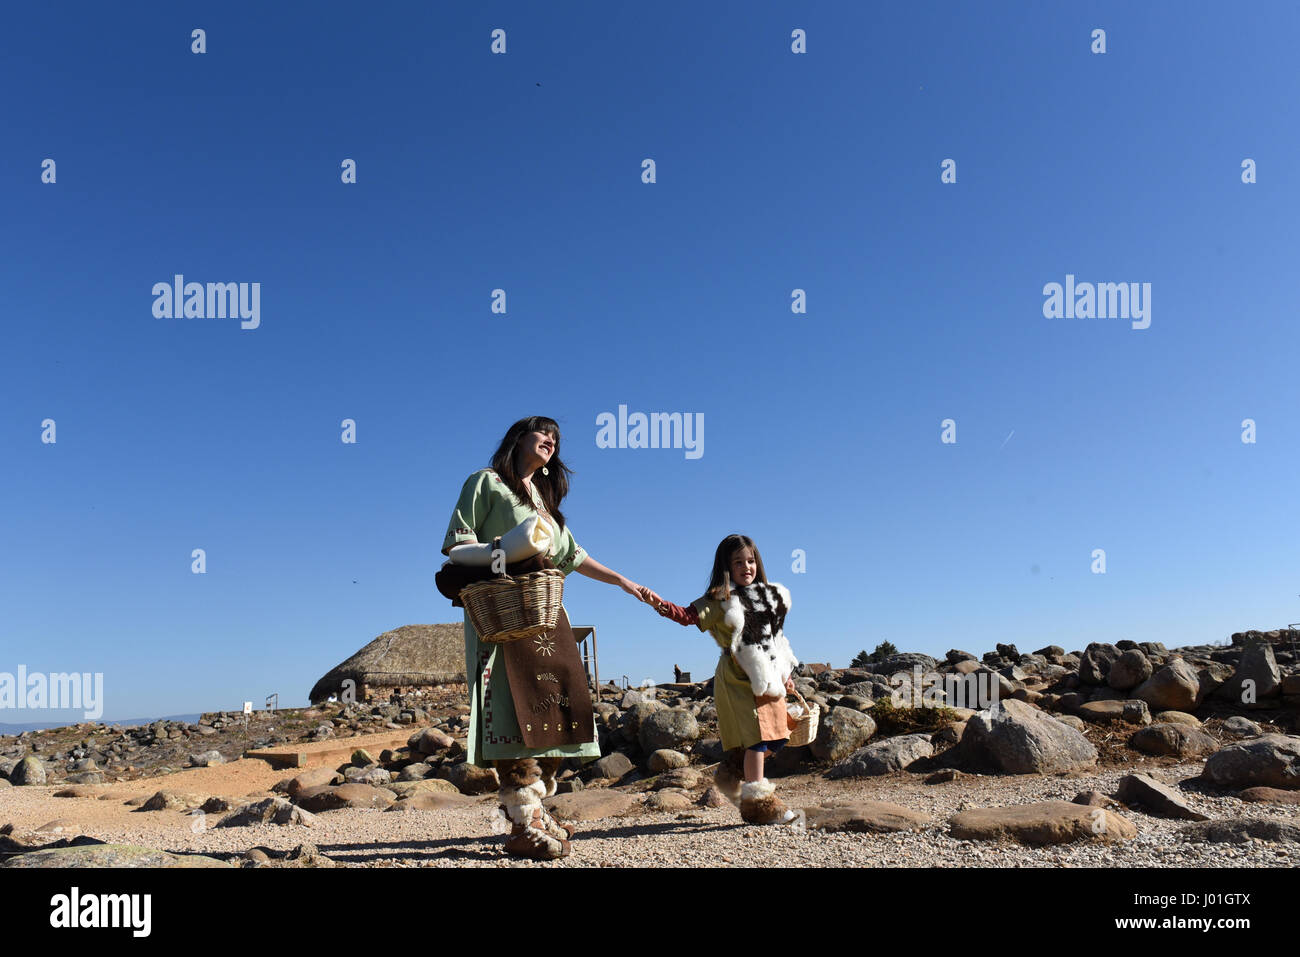 Garray, Spain. 08th Apr, 2017. A woman and her daughter wearing a costume of ancient times during a representation in the ancient Celtiberian settlement of Numantia, famous for its role in the Celtiberian War, in Soria, north of Spain. Credit: Jorge Sanz/Pacific Press/Alamy Live News Stock Photo